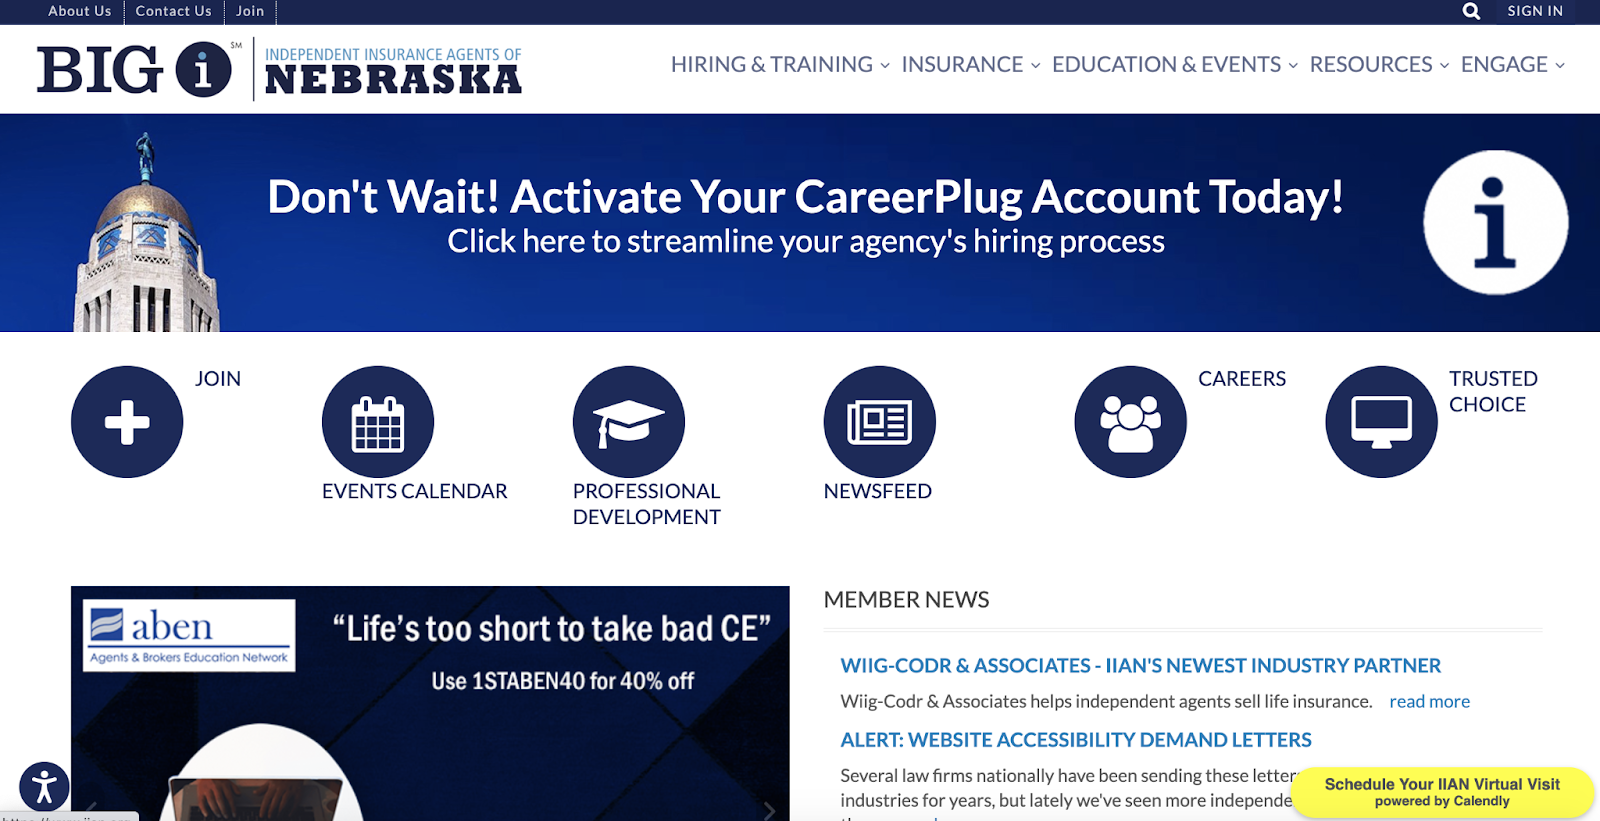 Independent Insurance Agents of Nebraska homepage that uses big icons that clearly indicate which menu item they correspond to, with the label directly next to the button.